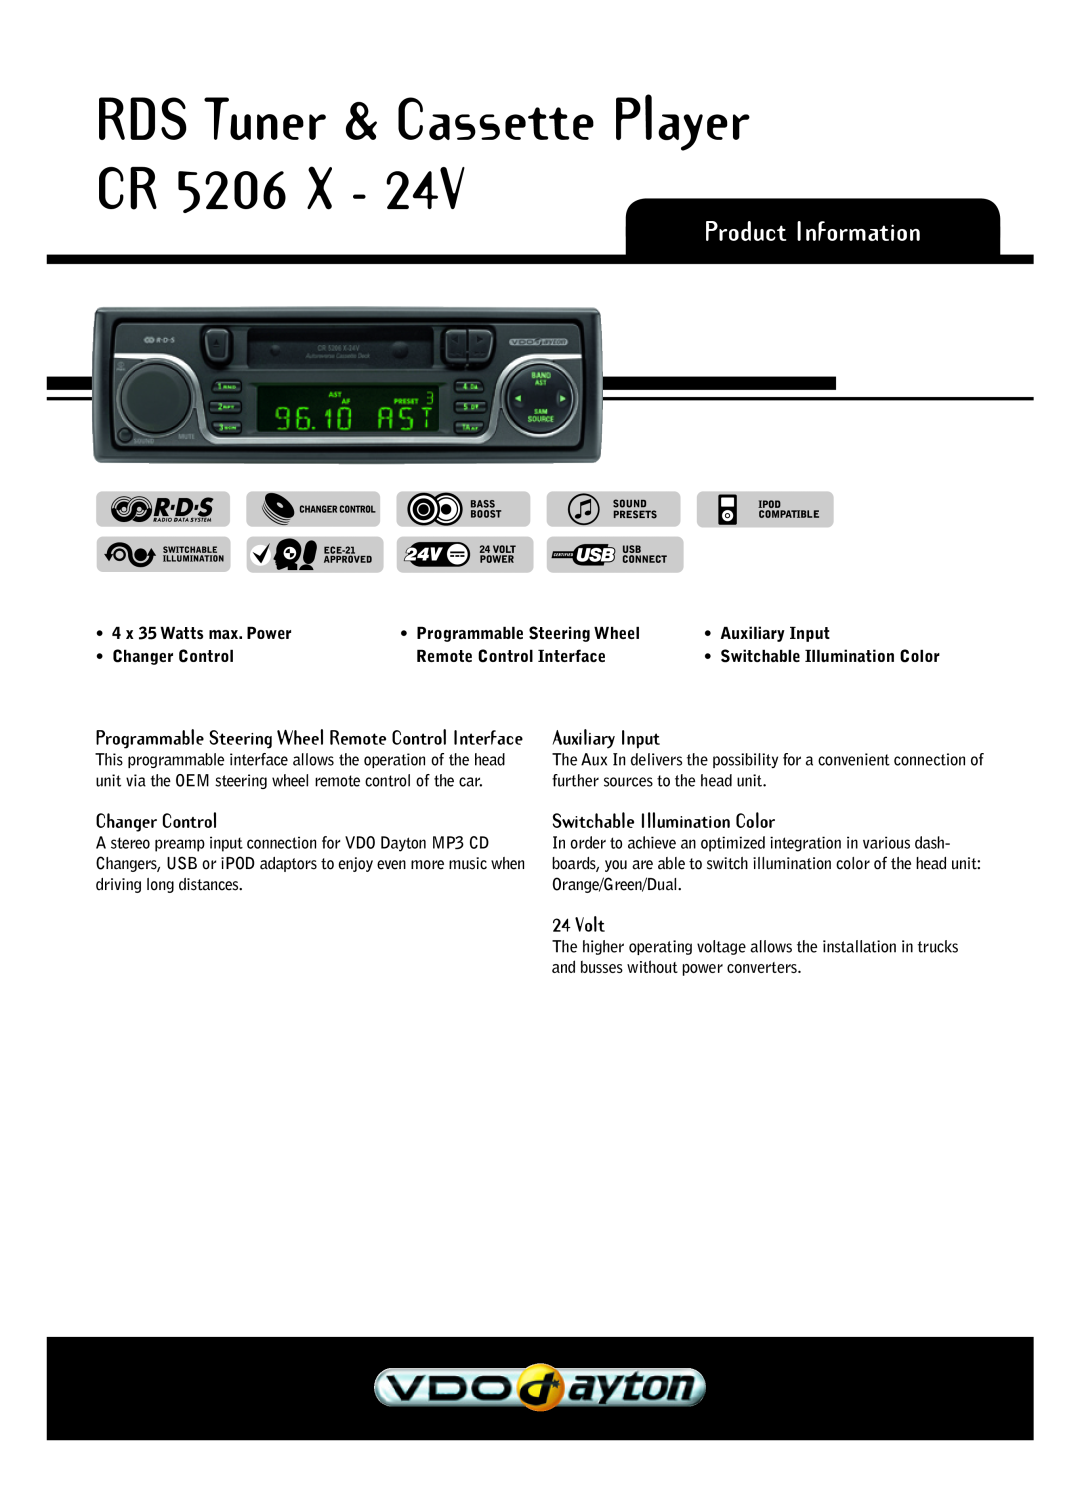 VDO Dayton CR 5206 X - 24V manual RDS Tuner & Cassette Player CR, Product Information, Auxiliary Input, Changer Control 